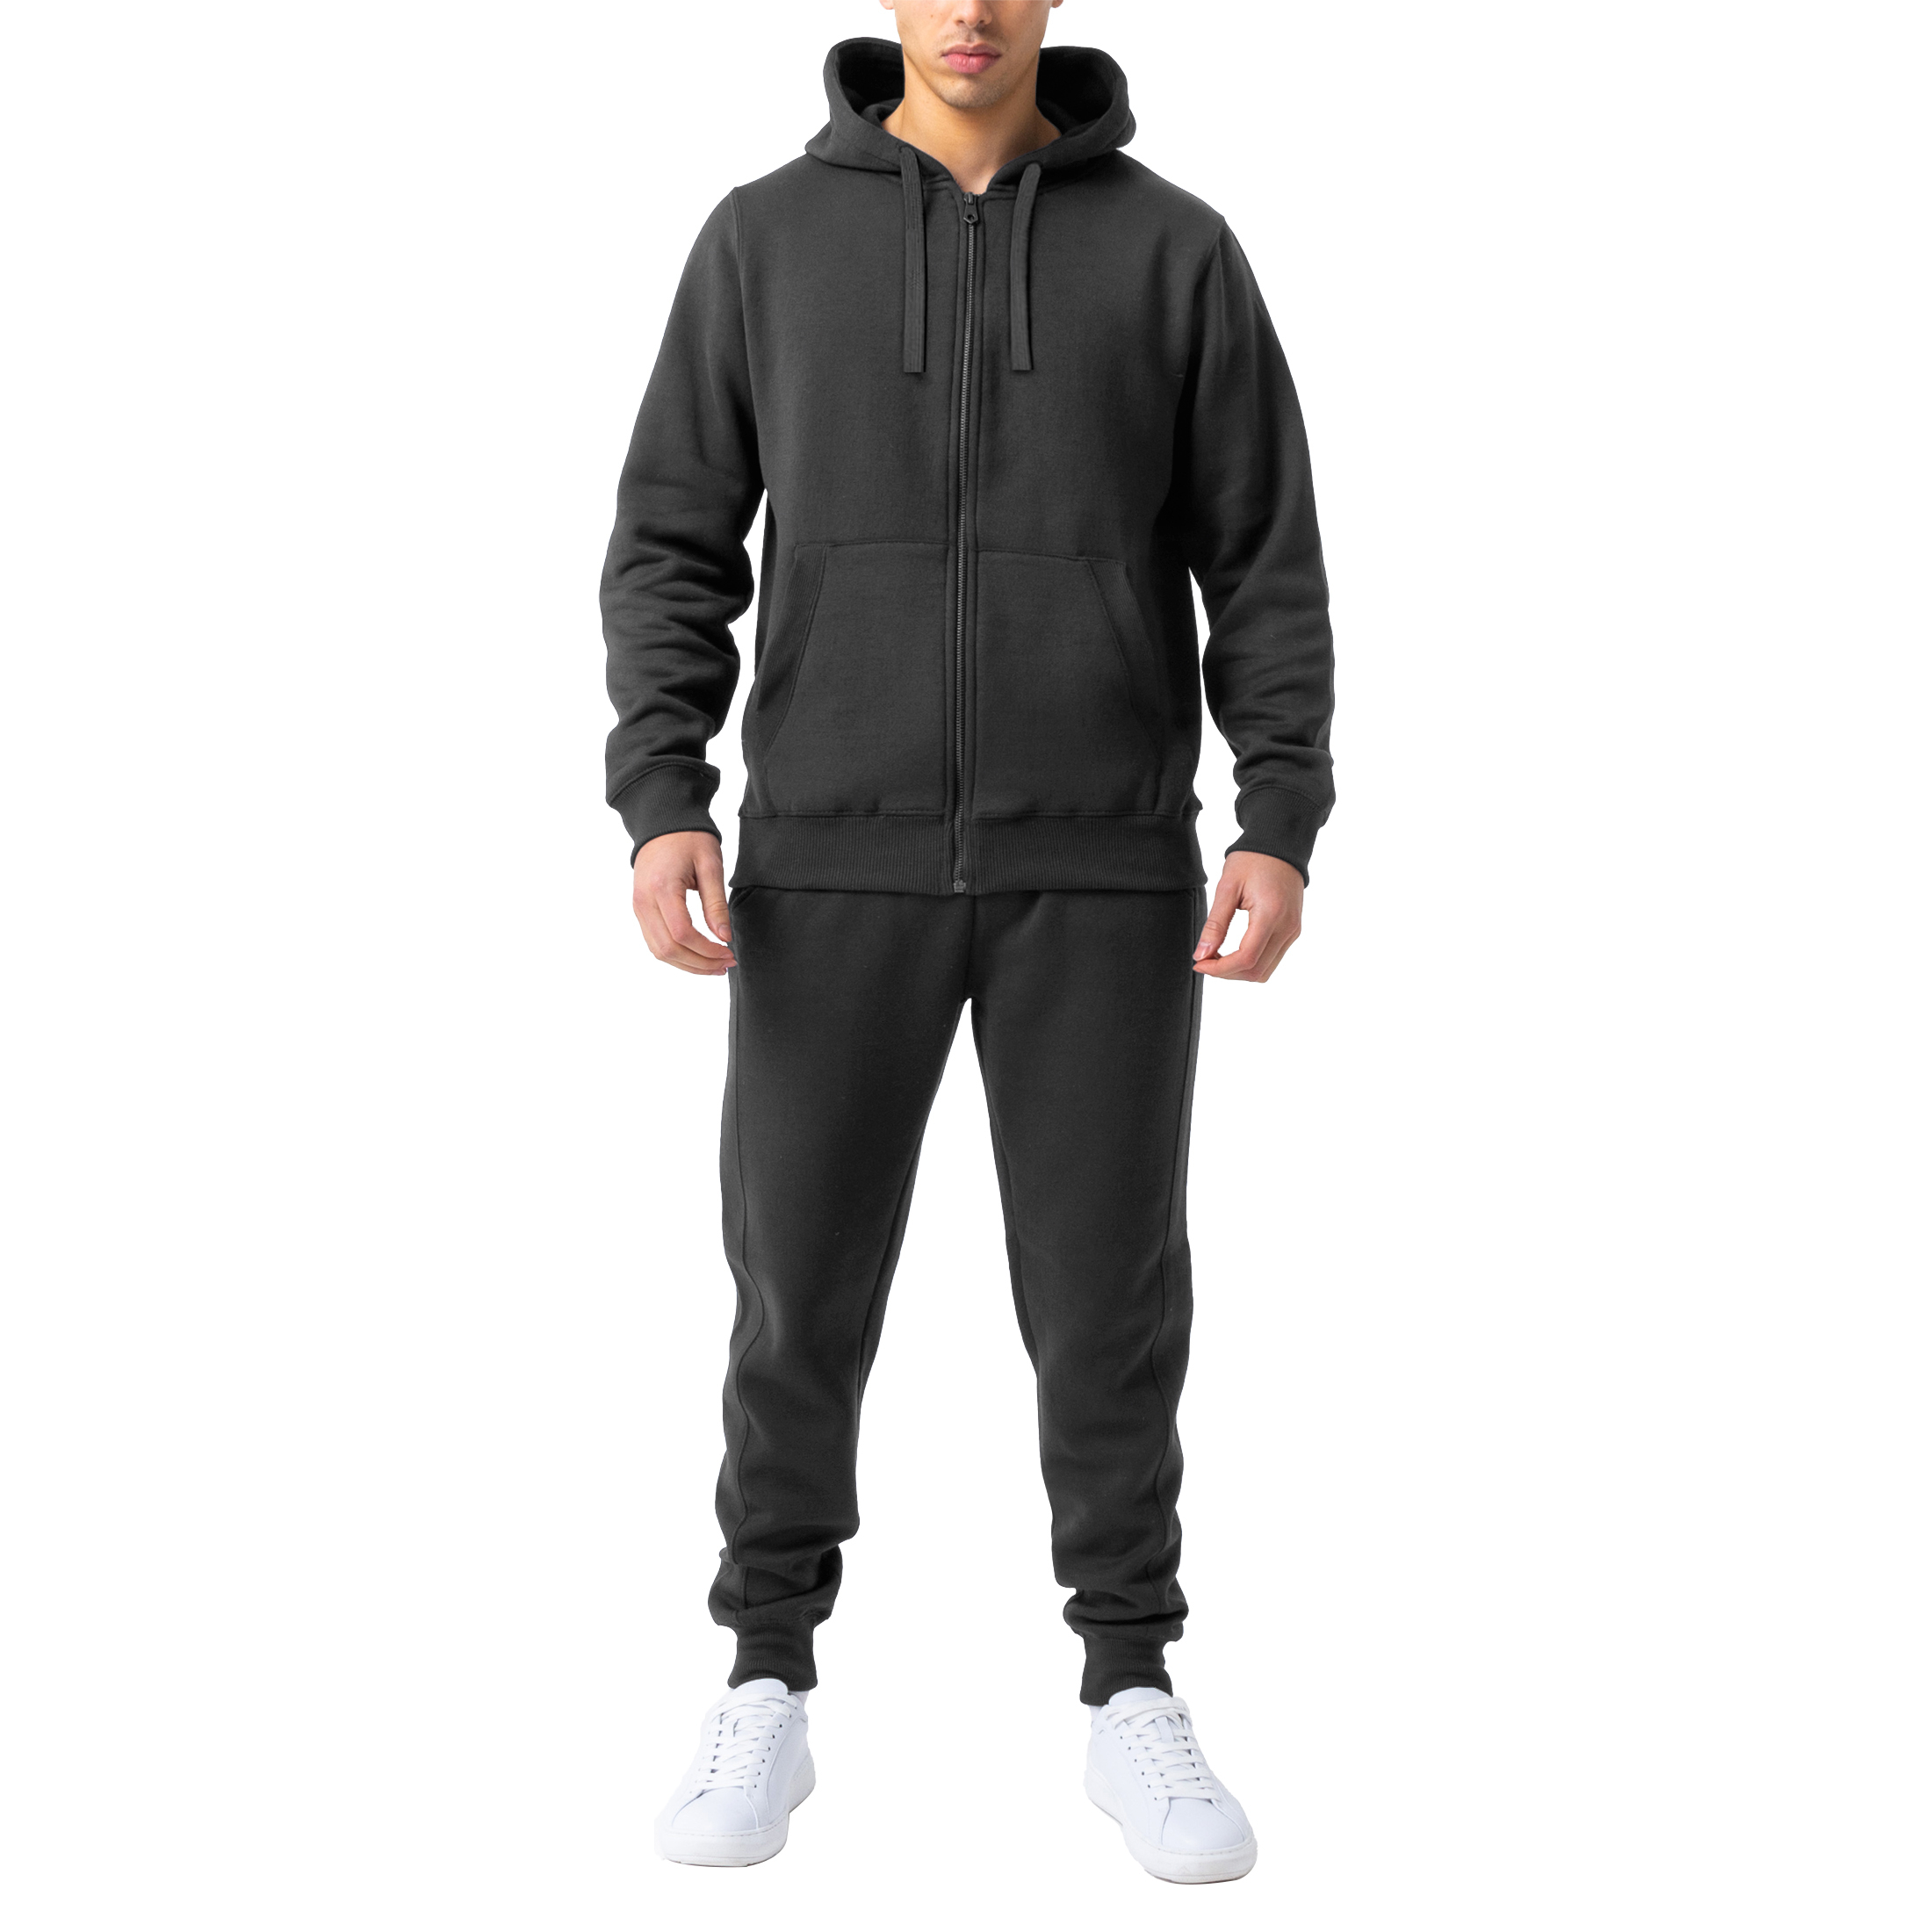 Men's Casual Jogging Athletic Active Full Zip Up Tracksuit - Charcoal, 3X-Large